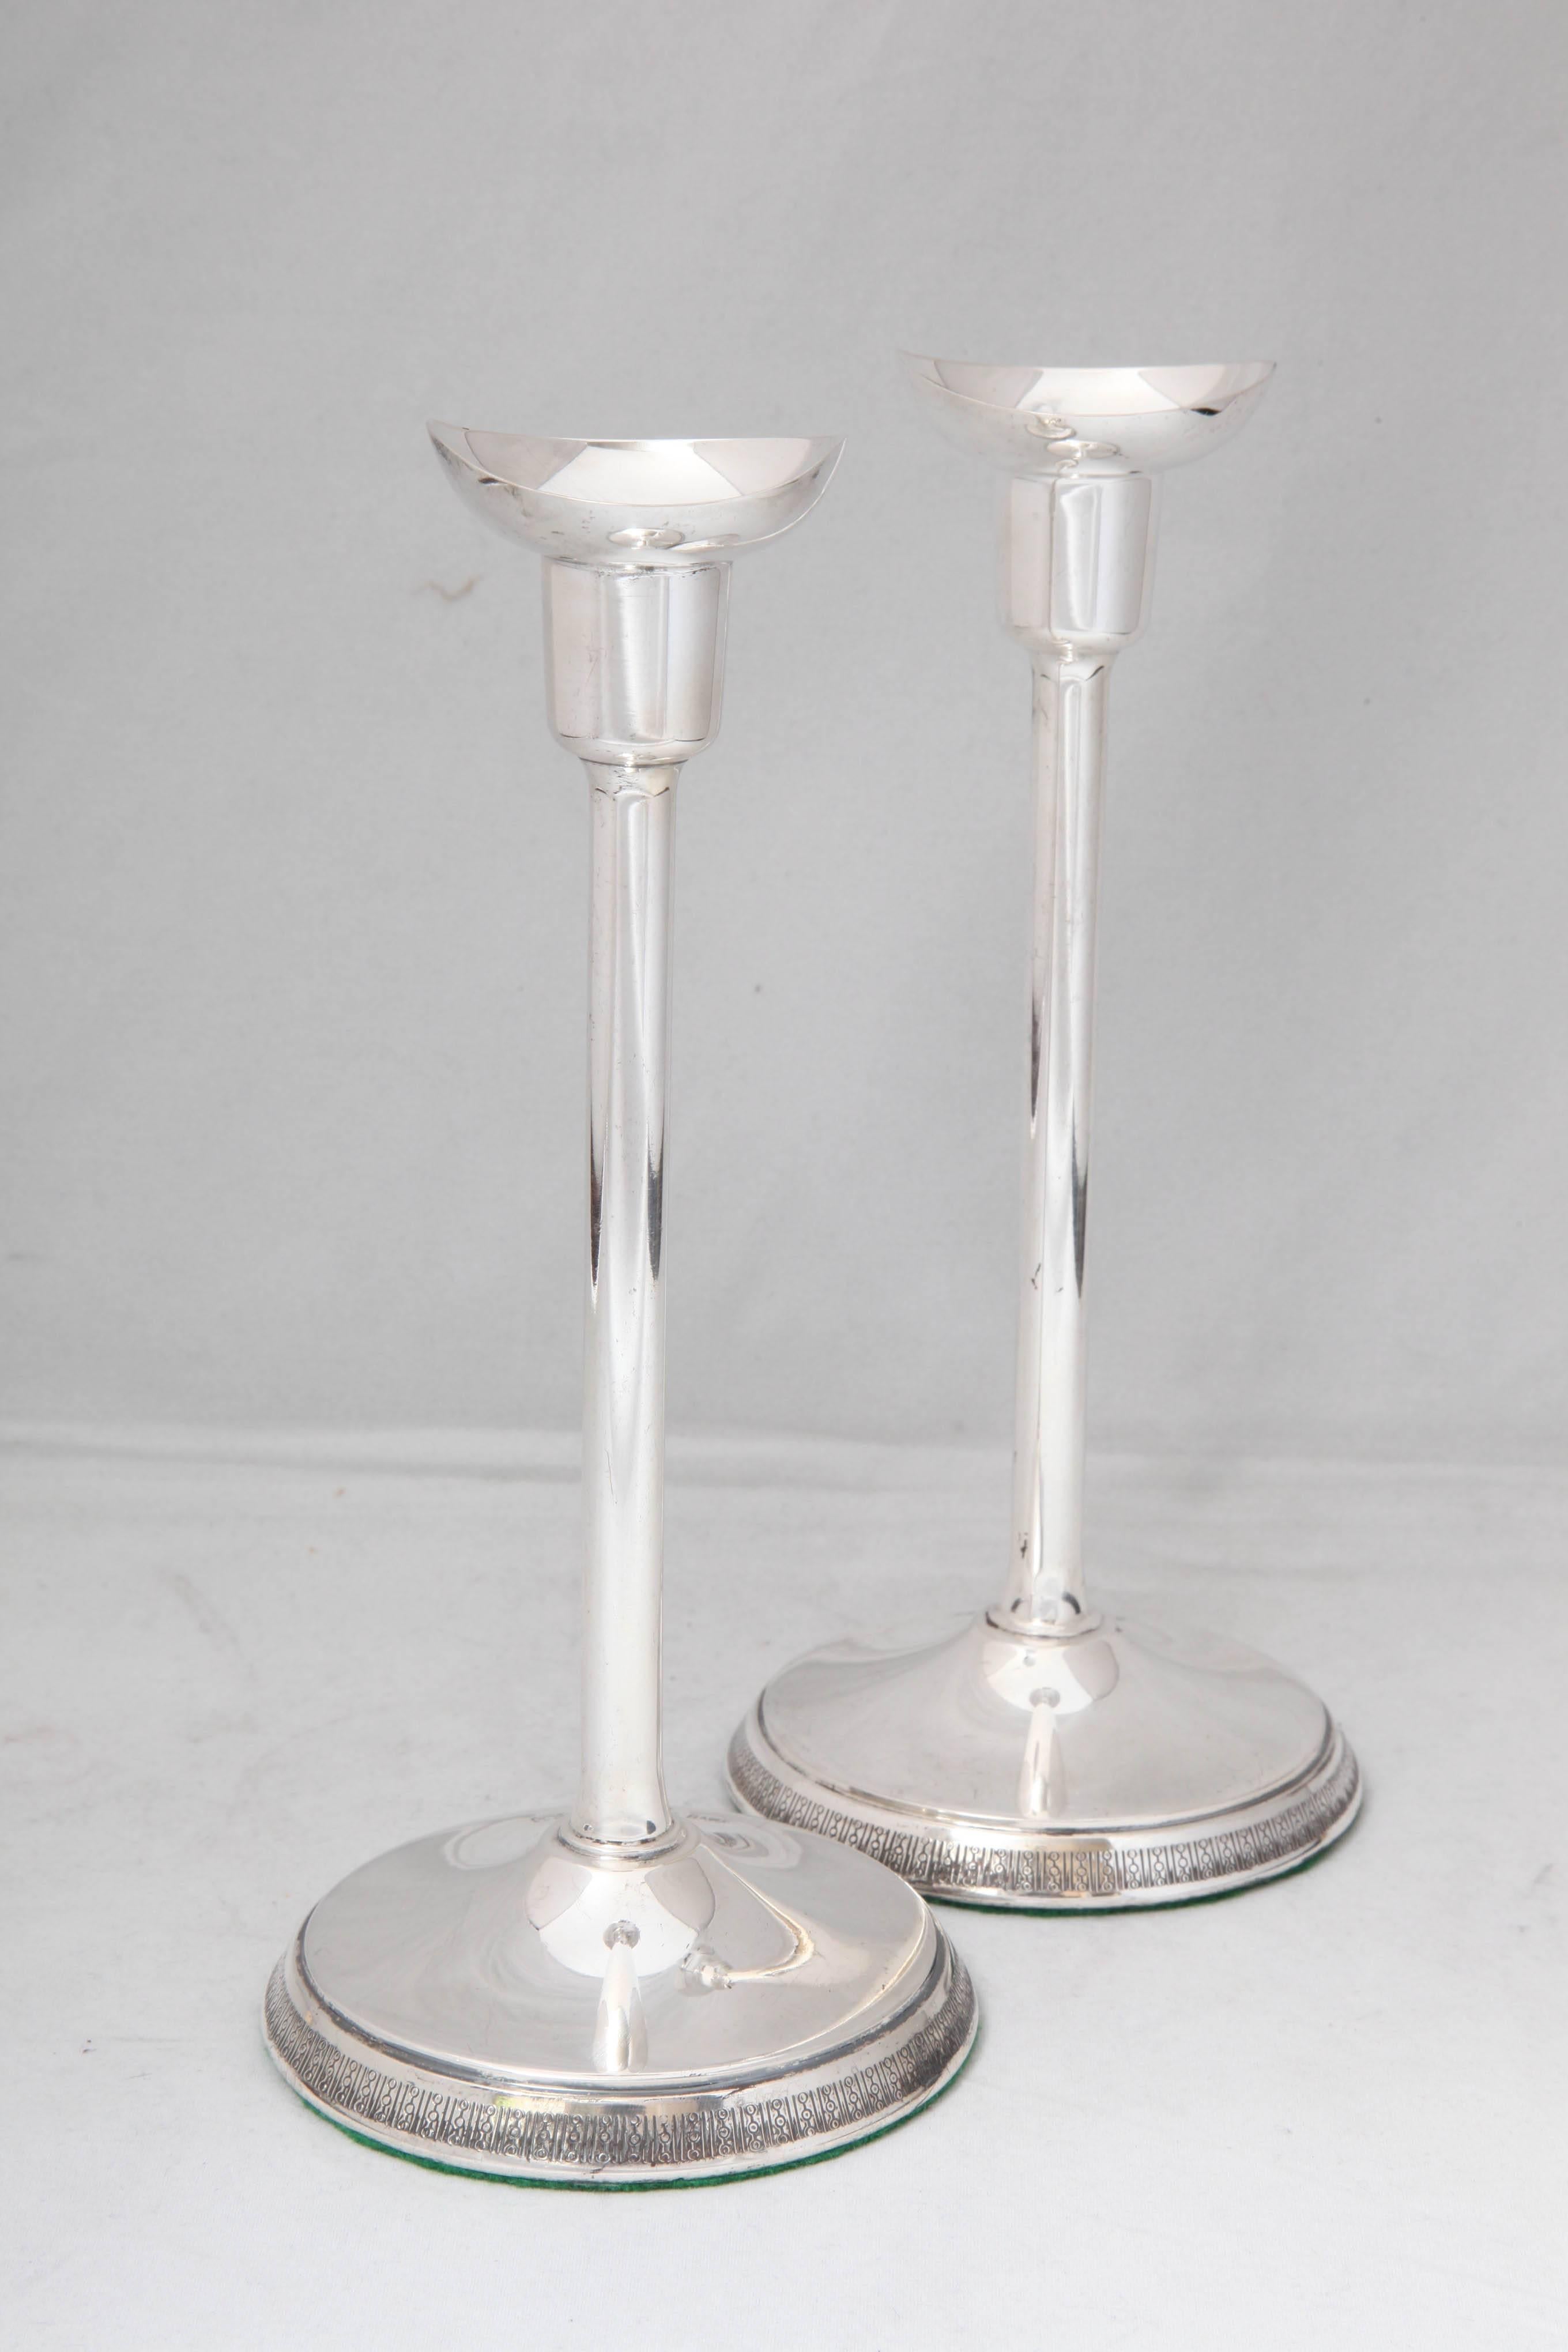 Pair of sterling silver, Mid-Century Modern candlesticks, Stockholm, Sweden, 1974, Ainar Axelsson, maker. Interesting etched design on border of base of both candlesticks. Each is 7 3/4